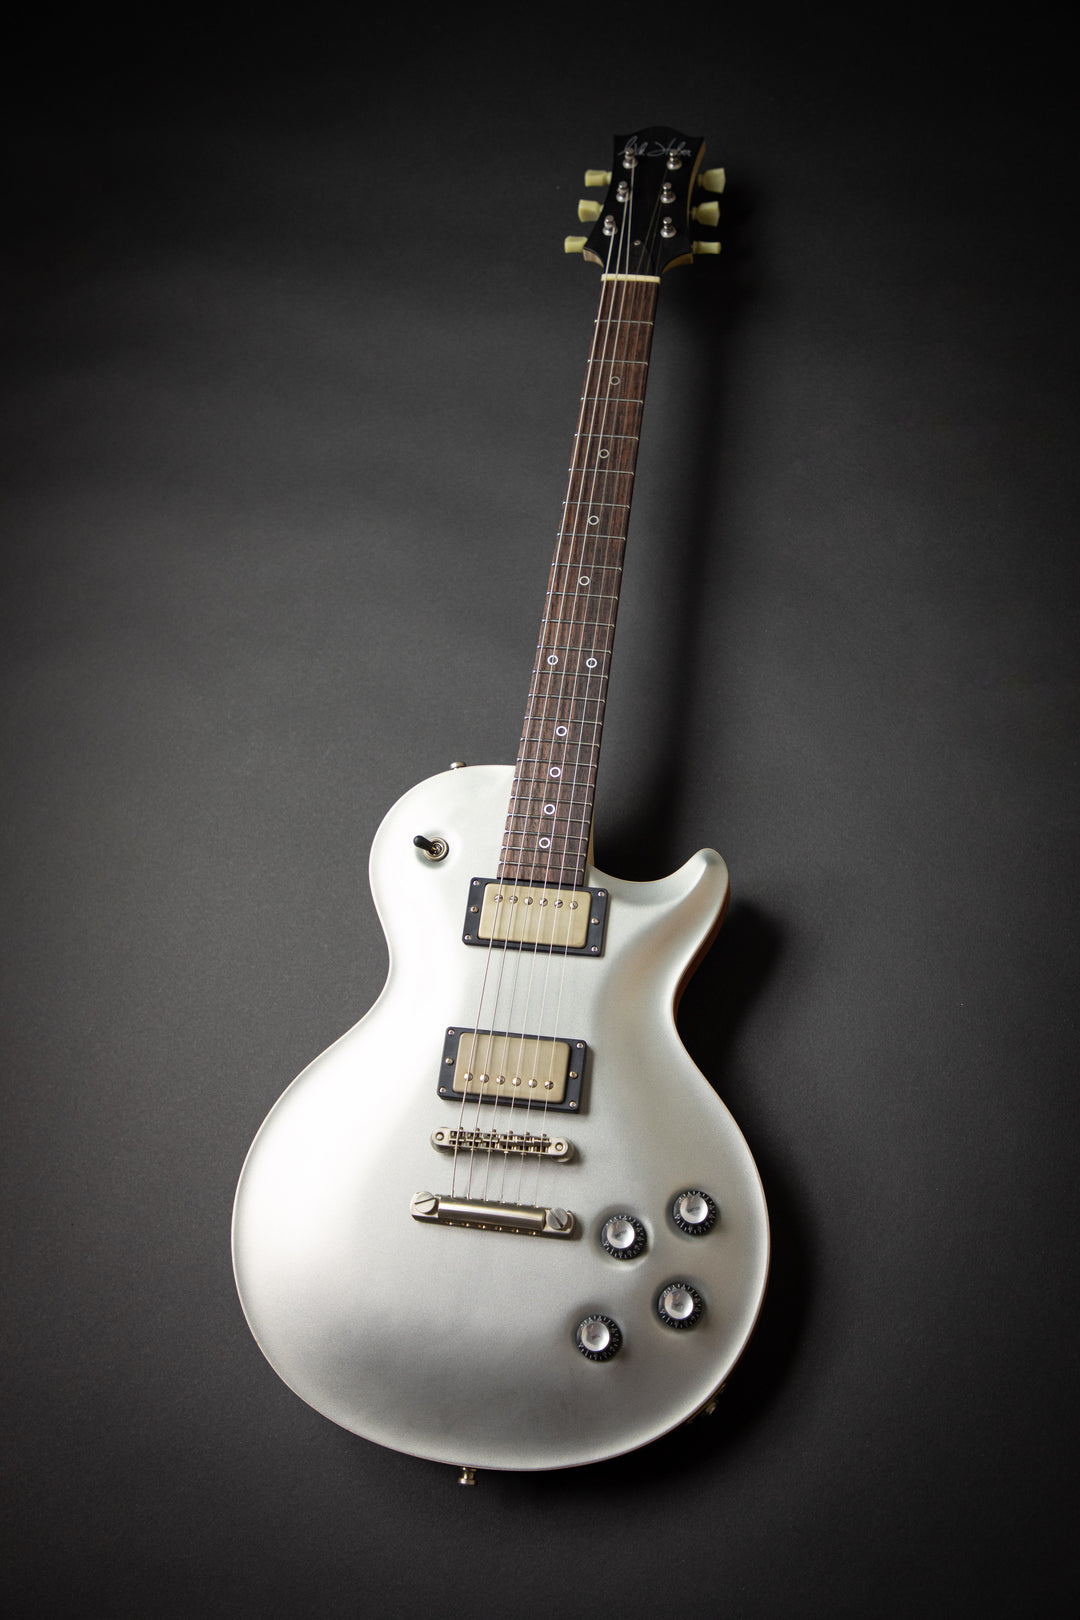 Orca Worn Platinum Silver Exp Curly Maple Neck (03372)